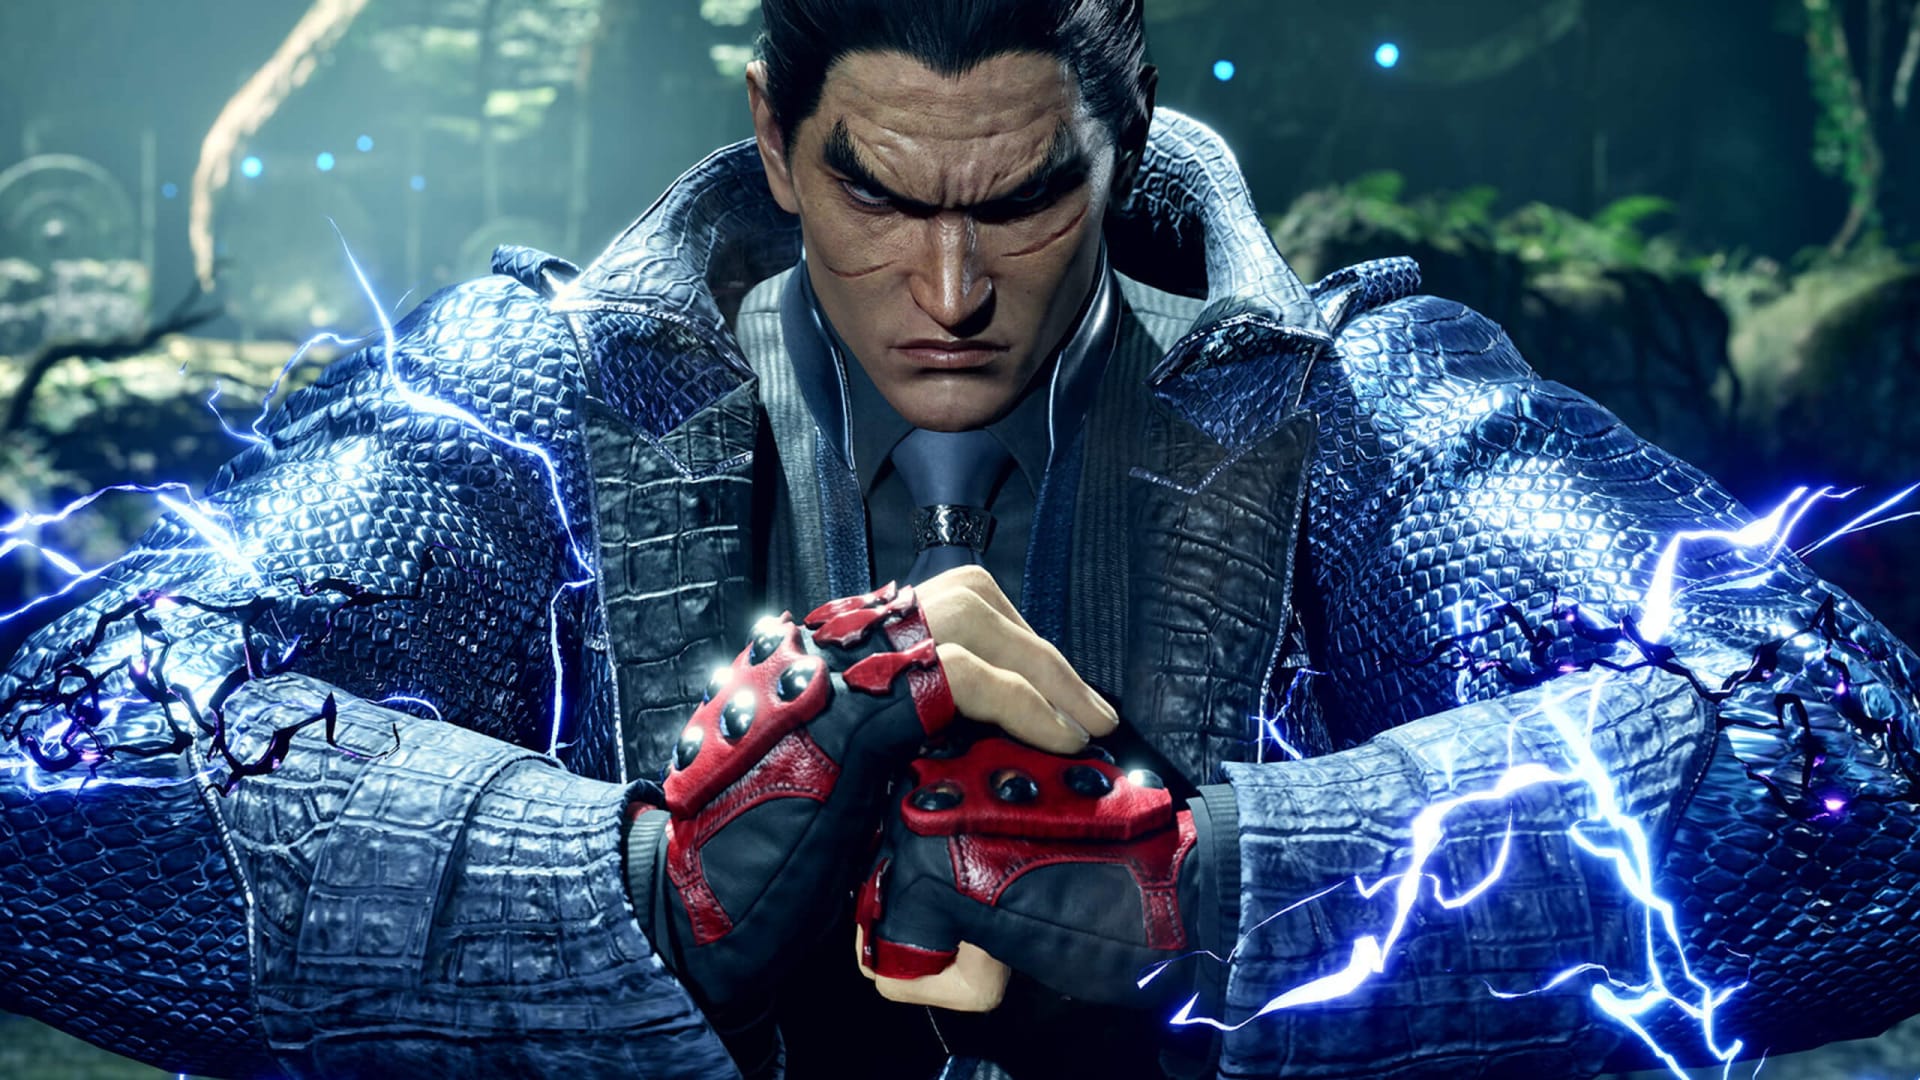 Tekken 8 Story Trailer Teases the Epic Continuation of the Mishima Saga